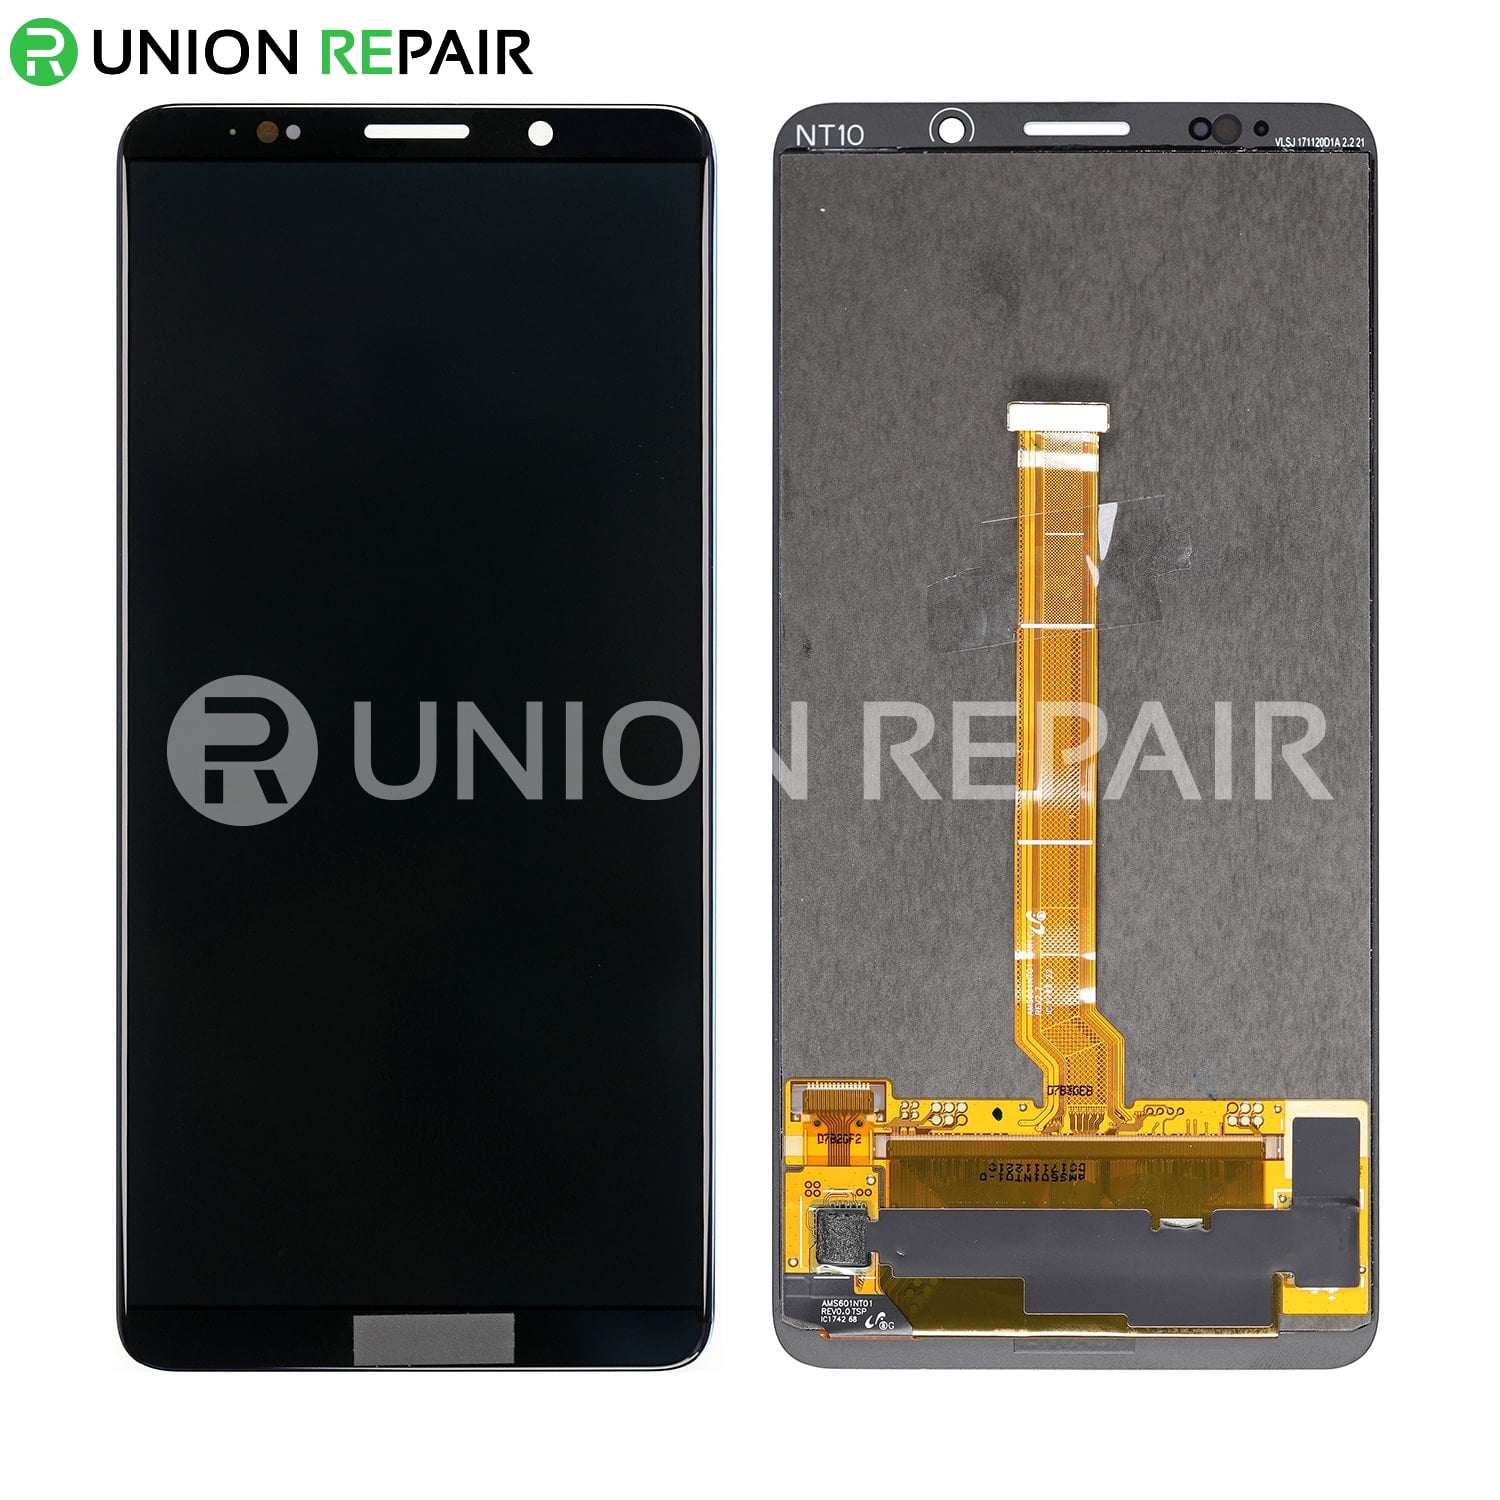 LCD For Huawei Mate 10 Pro BLA-L09 BLA-L29 BLA-AL00 LCD Display Touch Screen Digitizer Assembly For Huawei mate10 pro